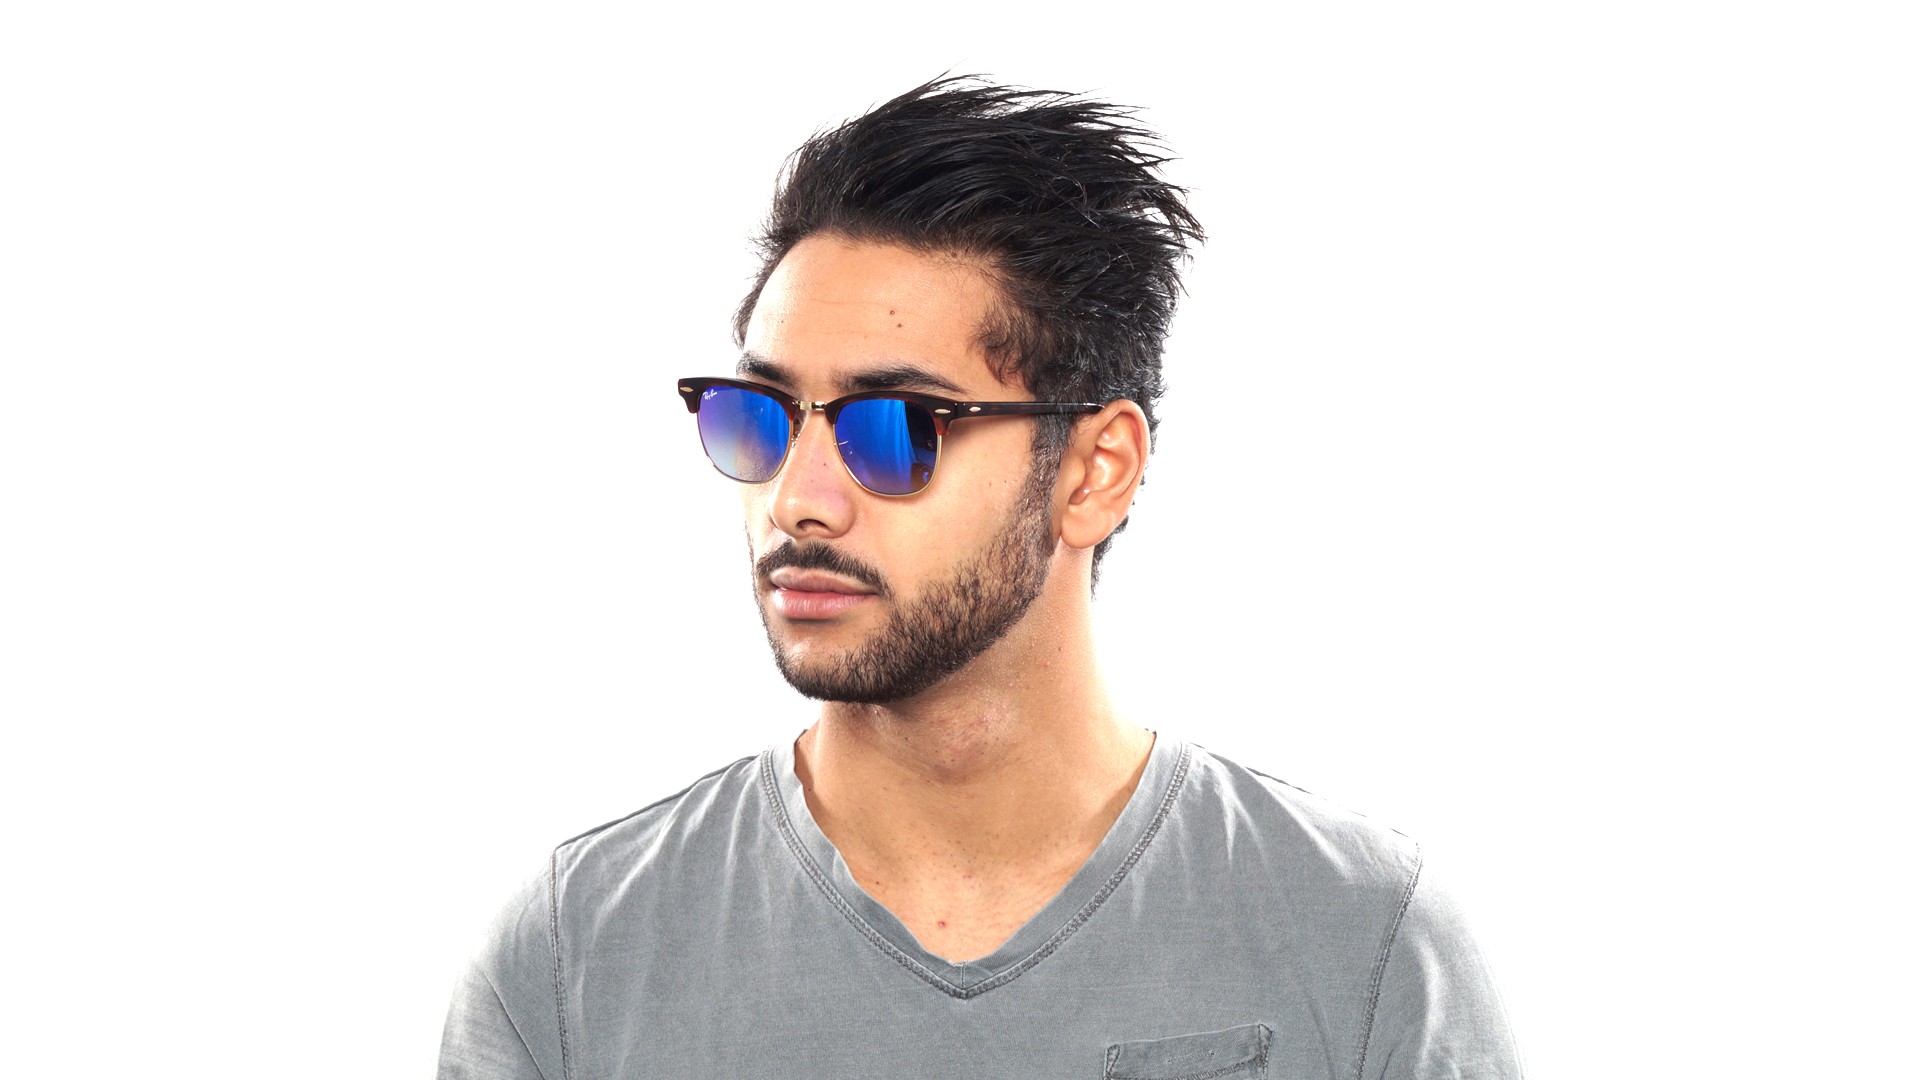 ray ban clubmaster blue lens